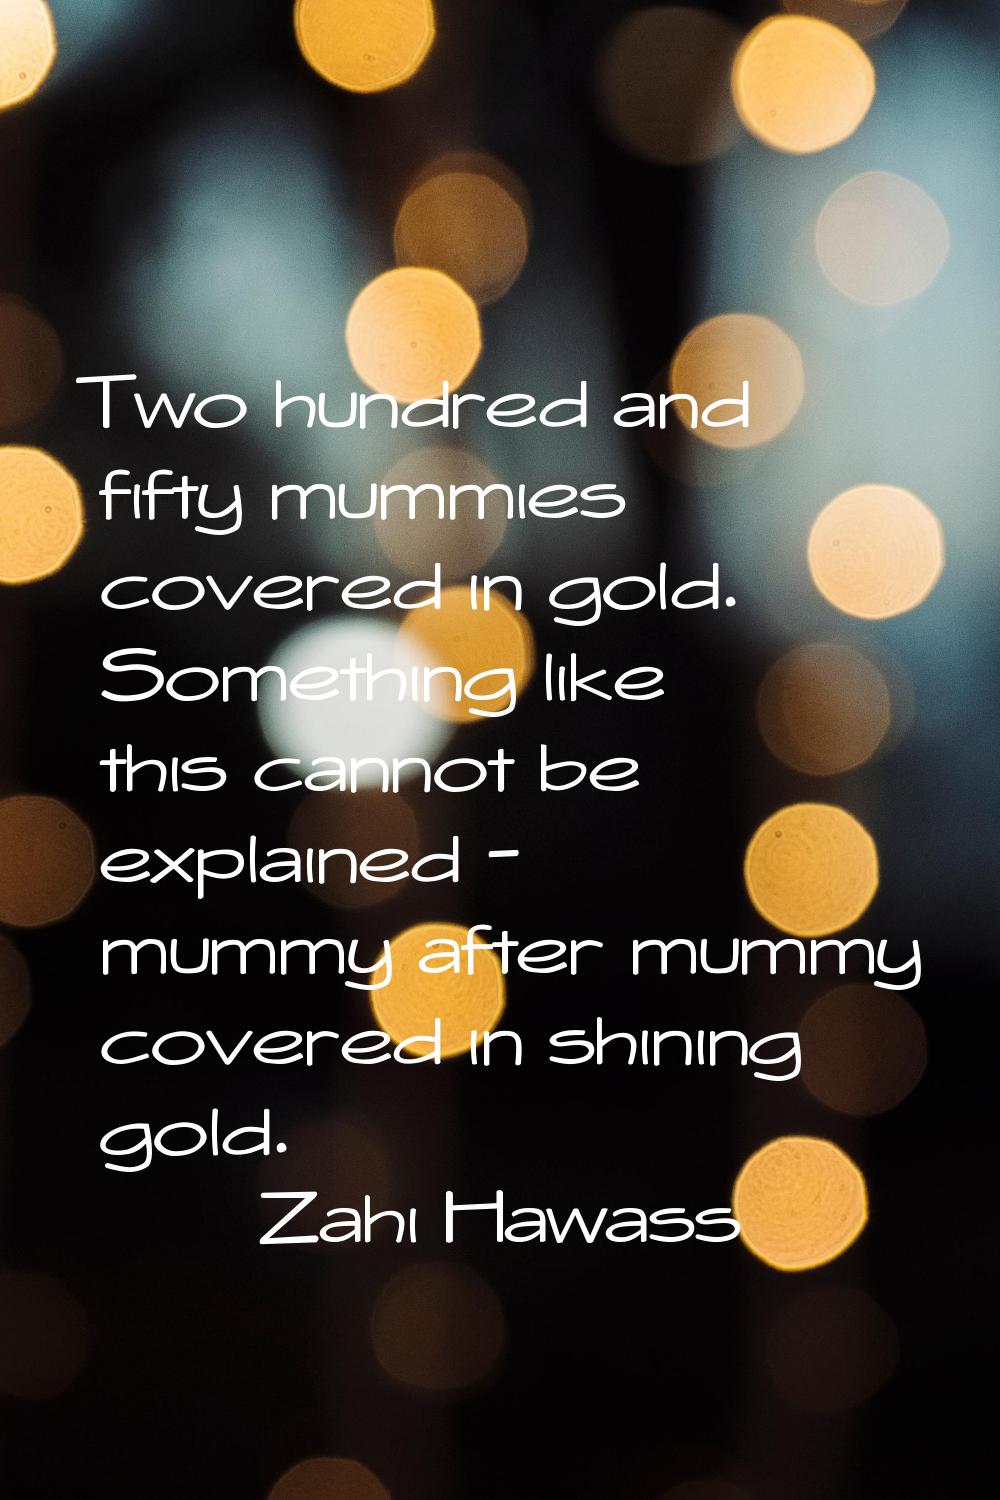 Two hundred and fifty mummies covered in gold. Something like this cannot be explained - mummy afte